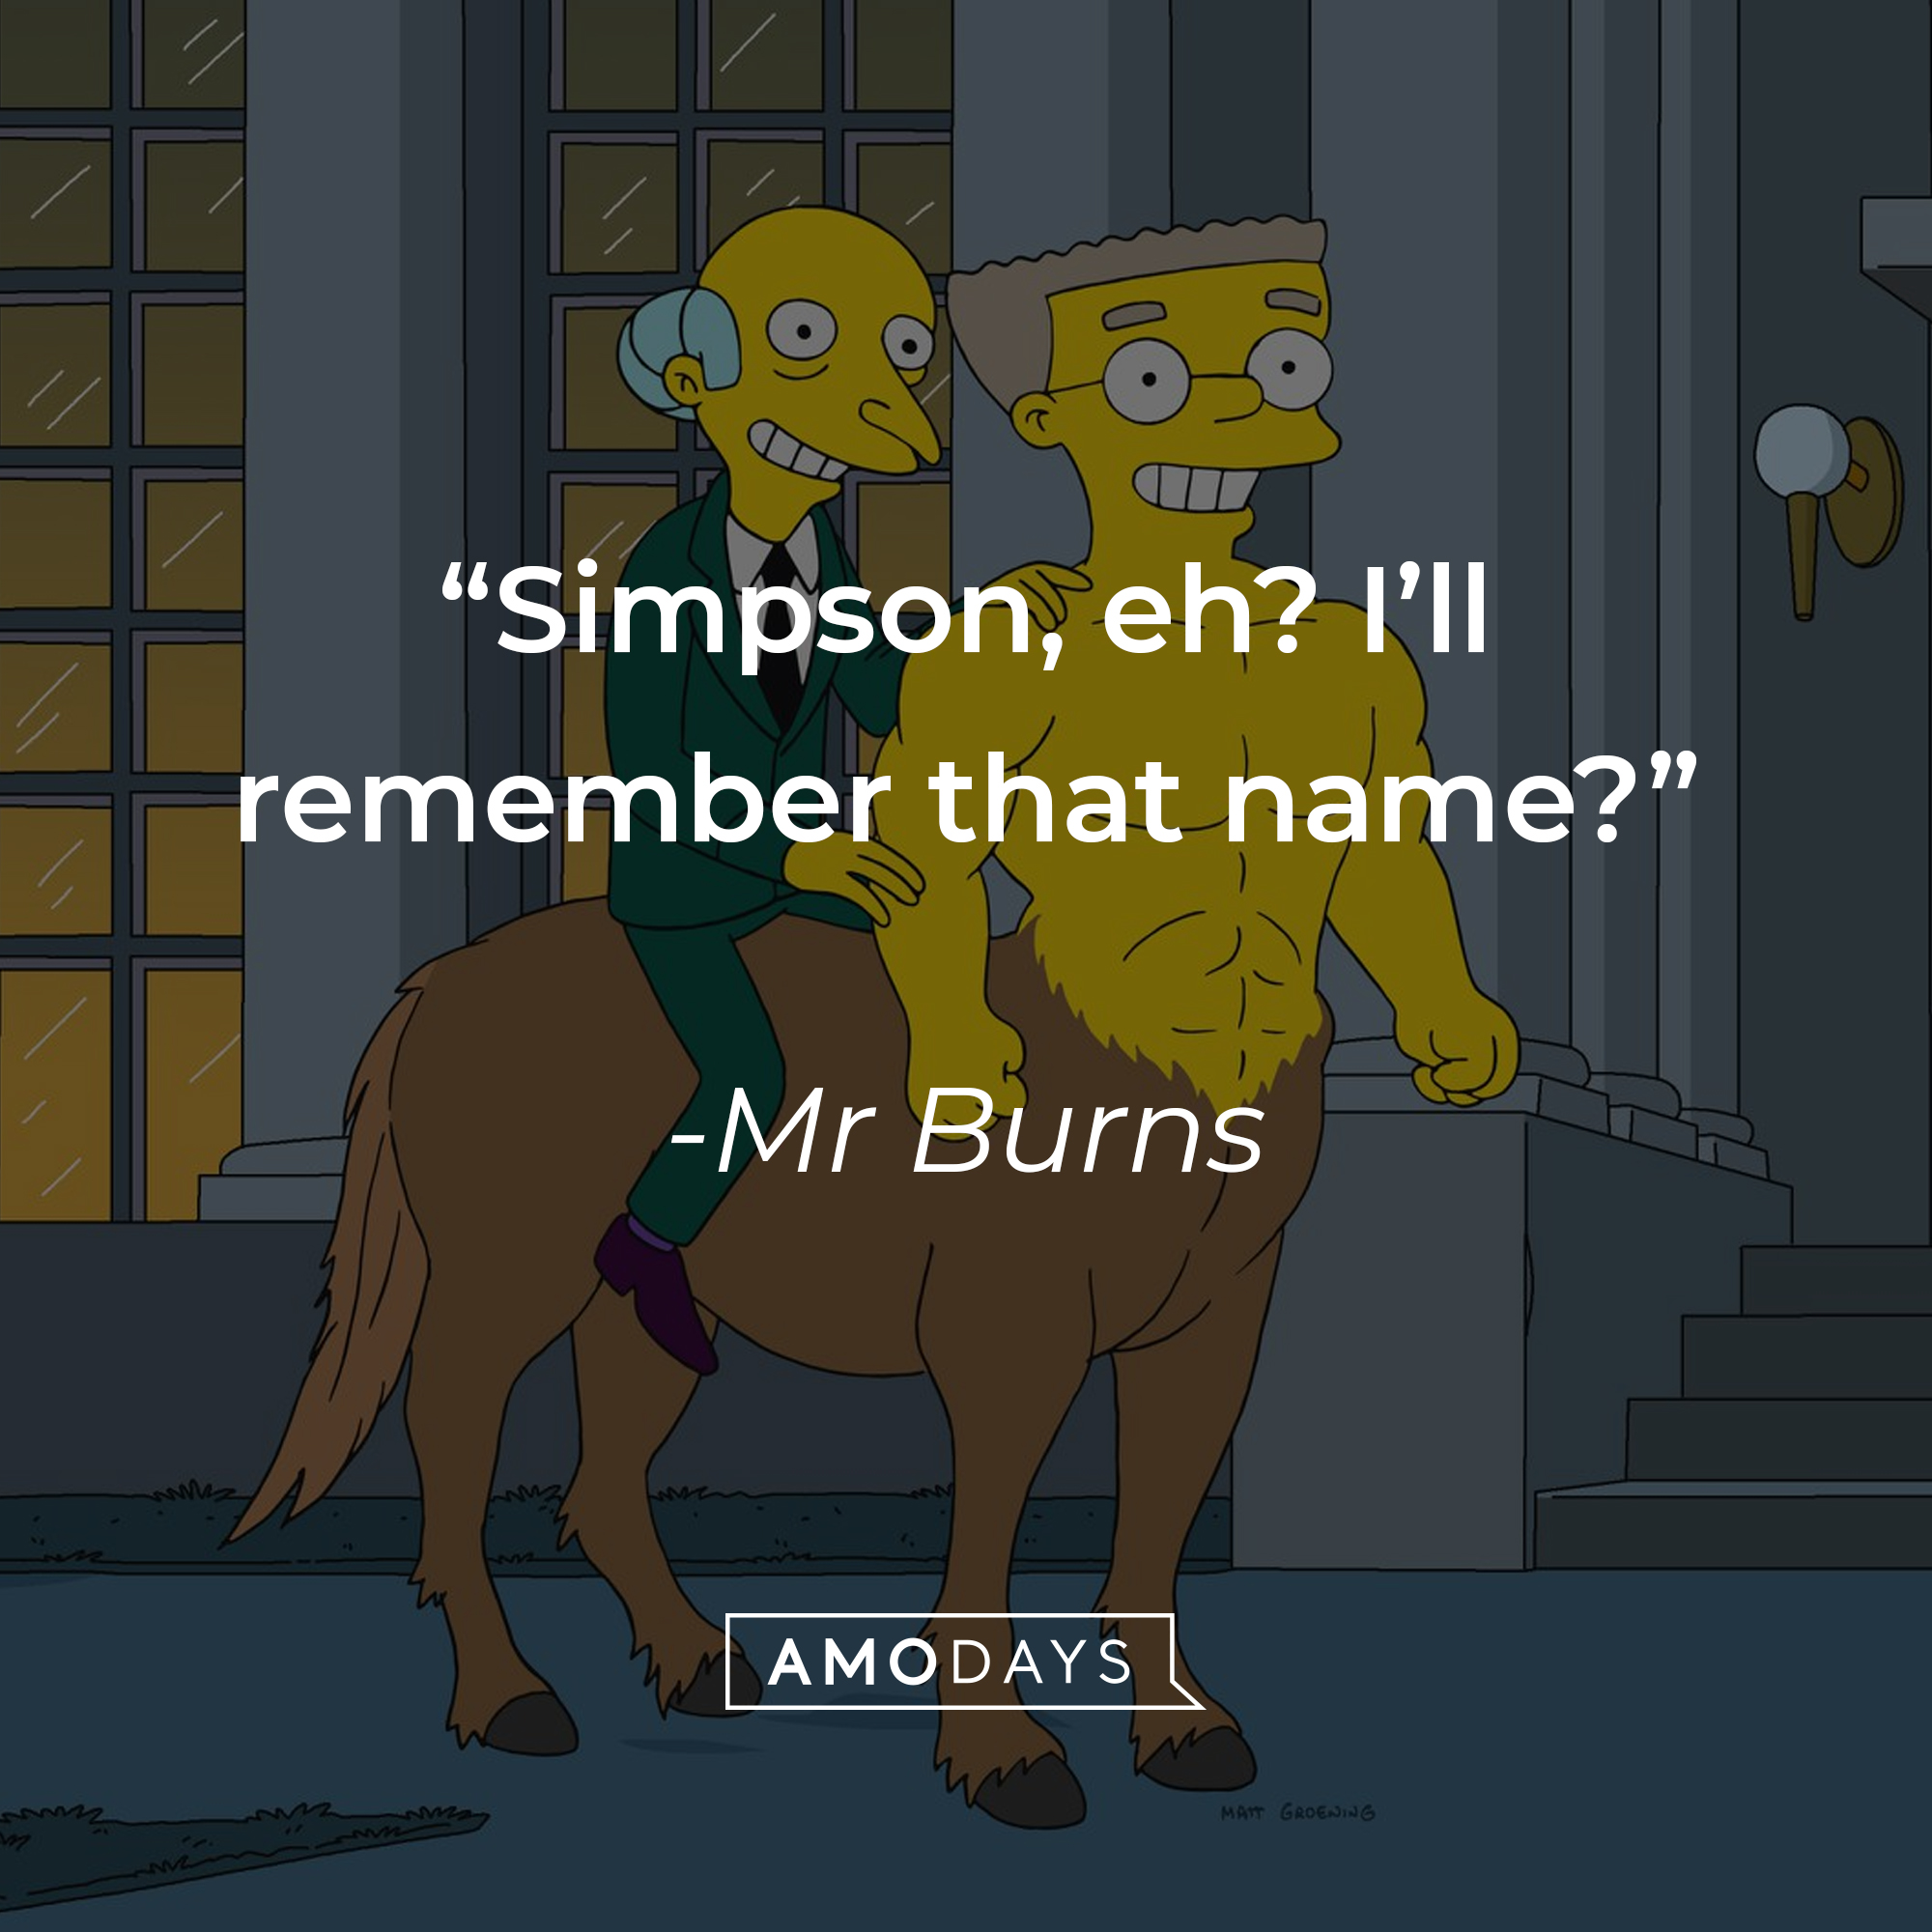 Mr. Burns' quote: "Simpson, eh? I'll remember that name?" | Source: facebook.com/TheSimpsons